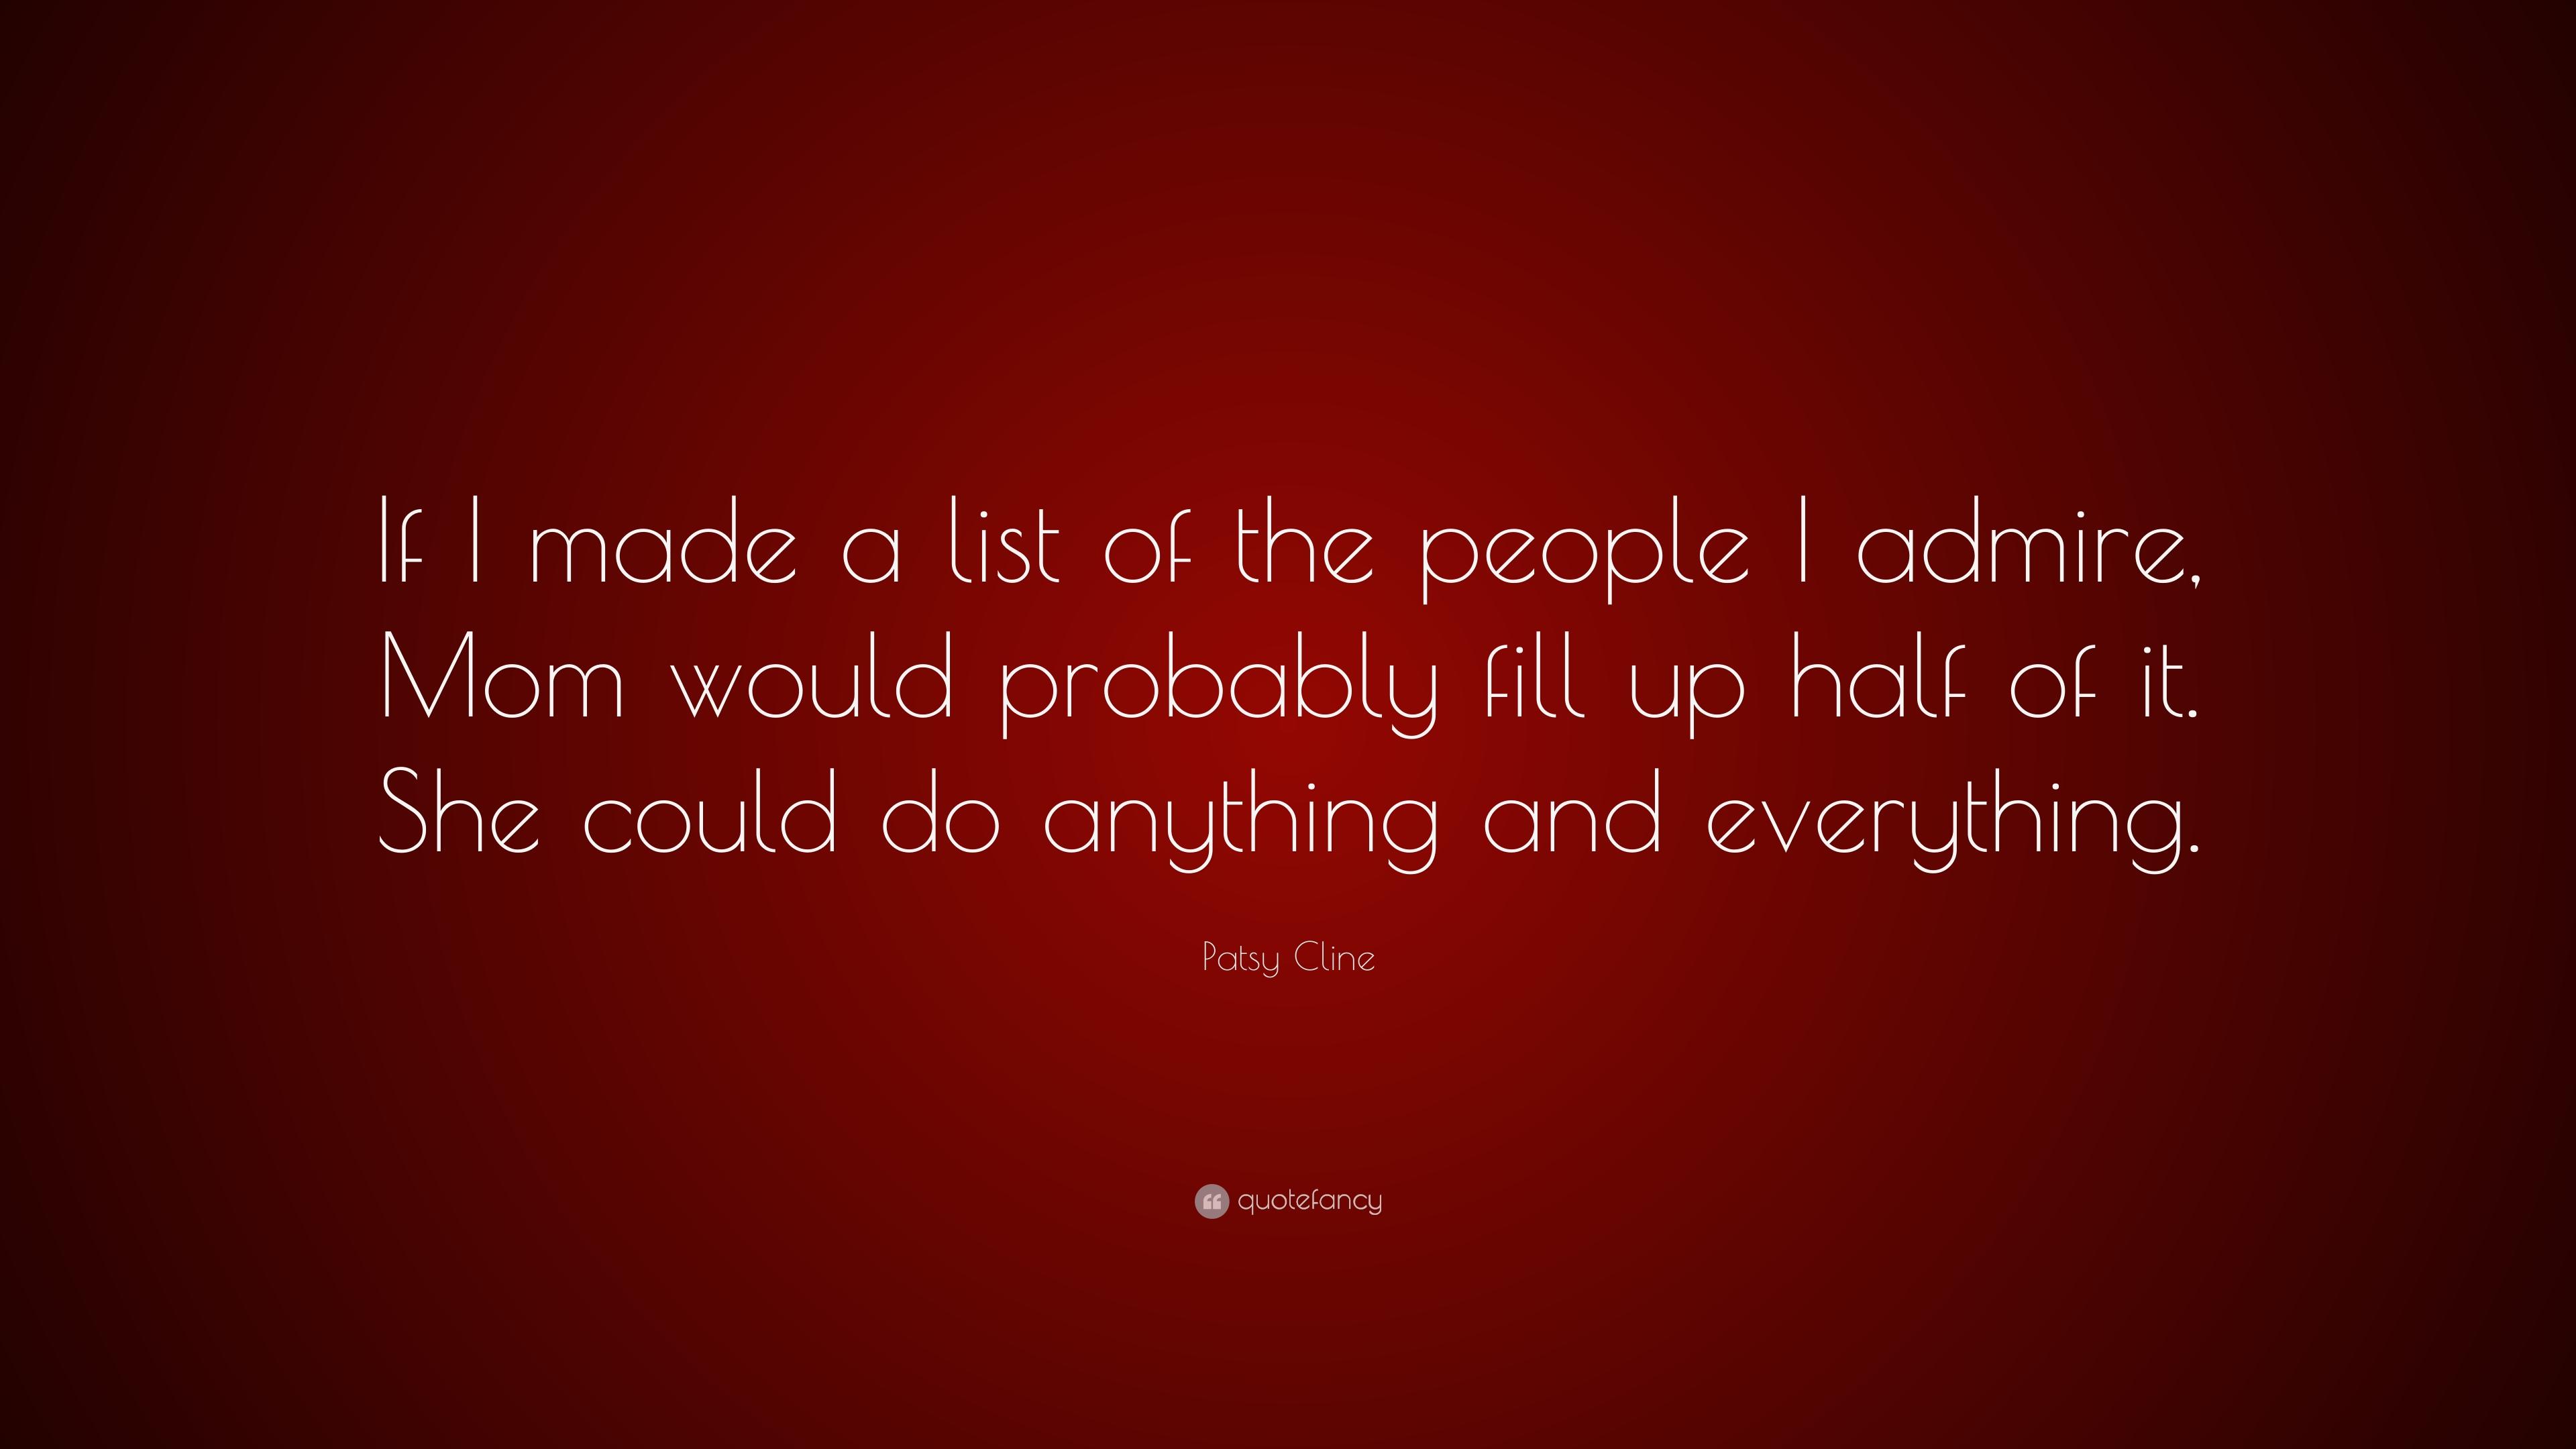 Patsy Cline Quote: “If I made a list of the people I admire, Mom